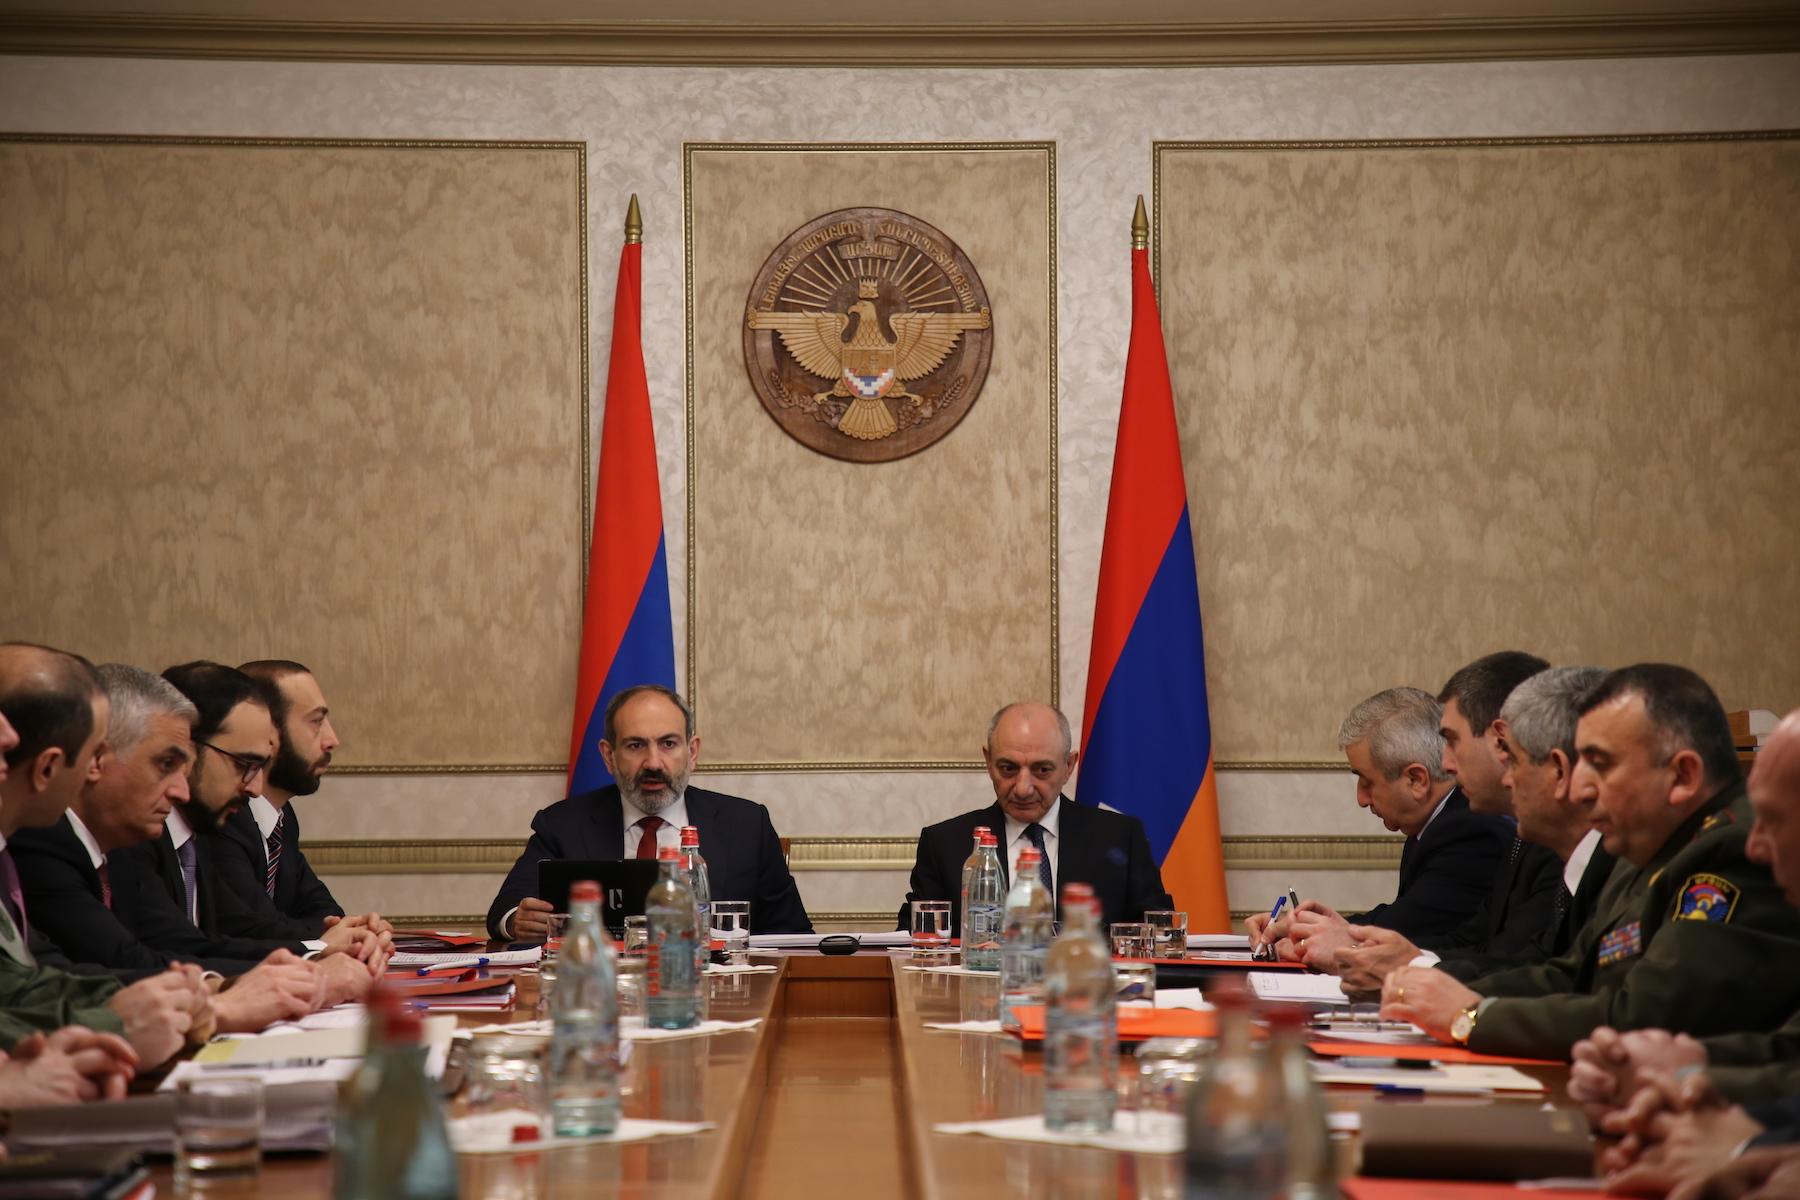 Pashinyan and Karabakh President Co-Chair Security Councils Meeting